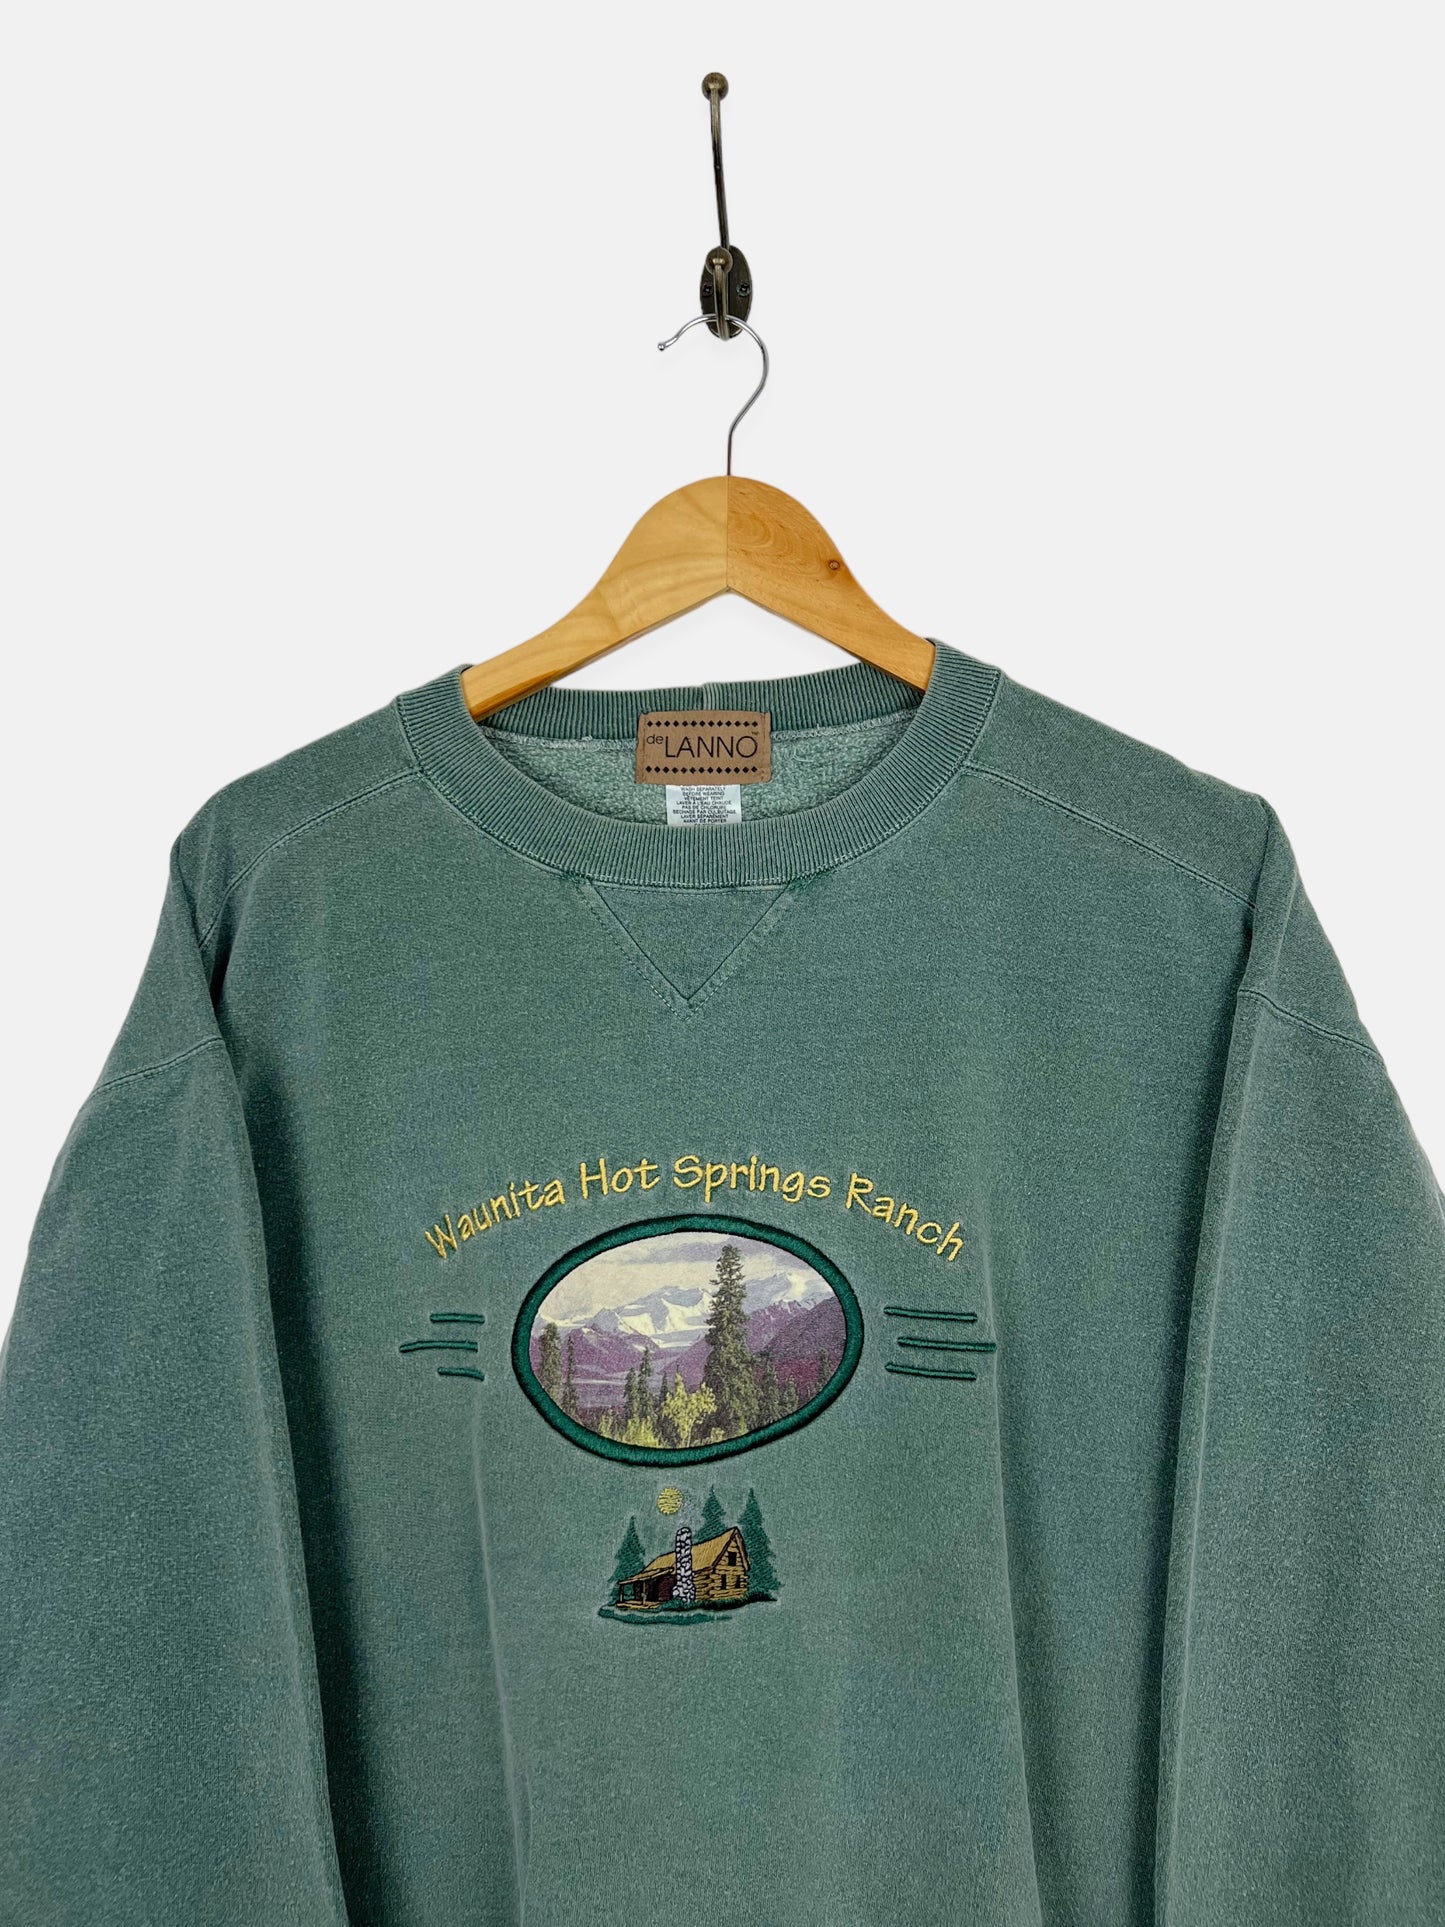 90's Waunita Hot Springs Ranch Canada Made Embroidered Vintage Sweatshirt Size L